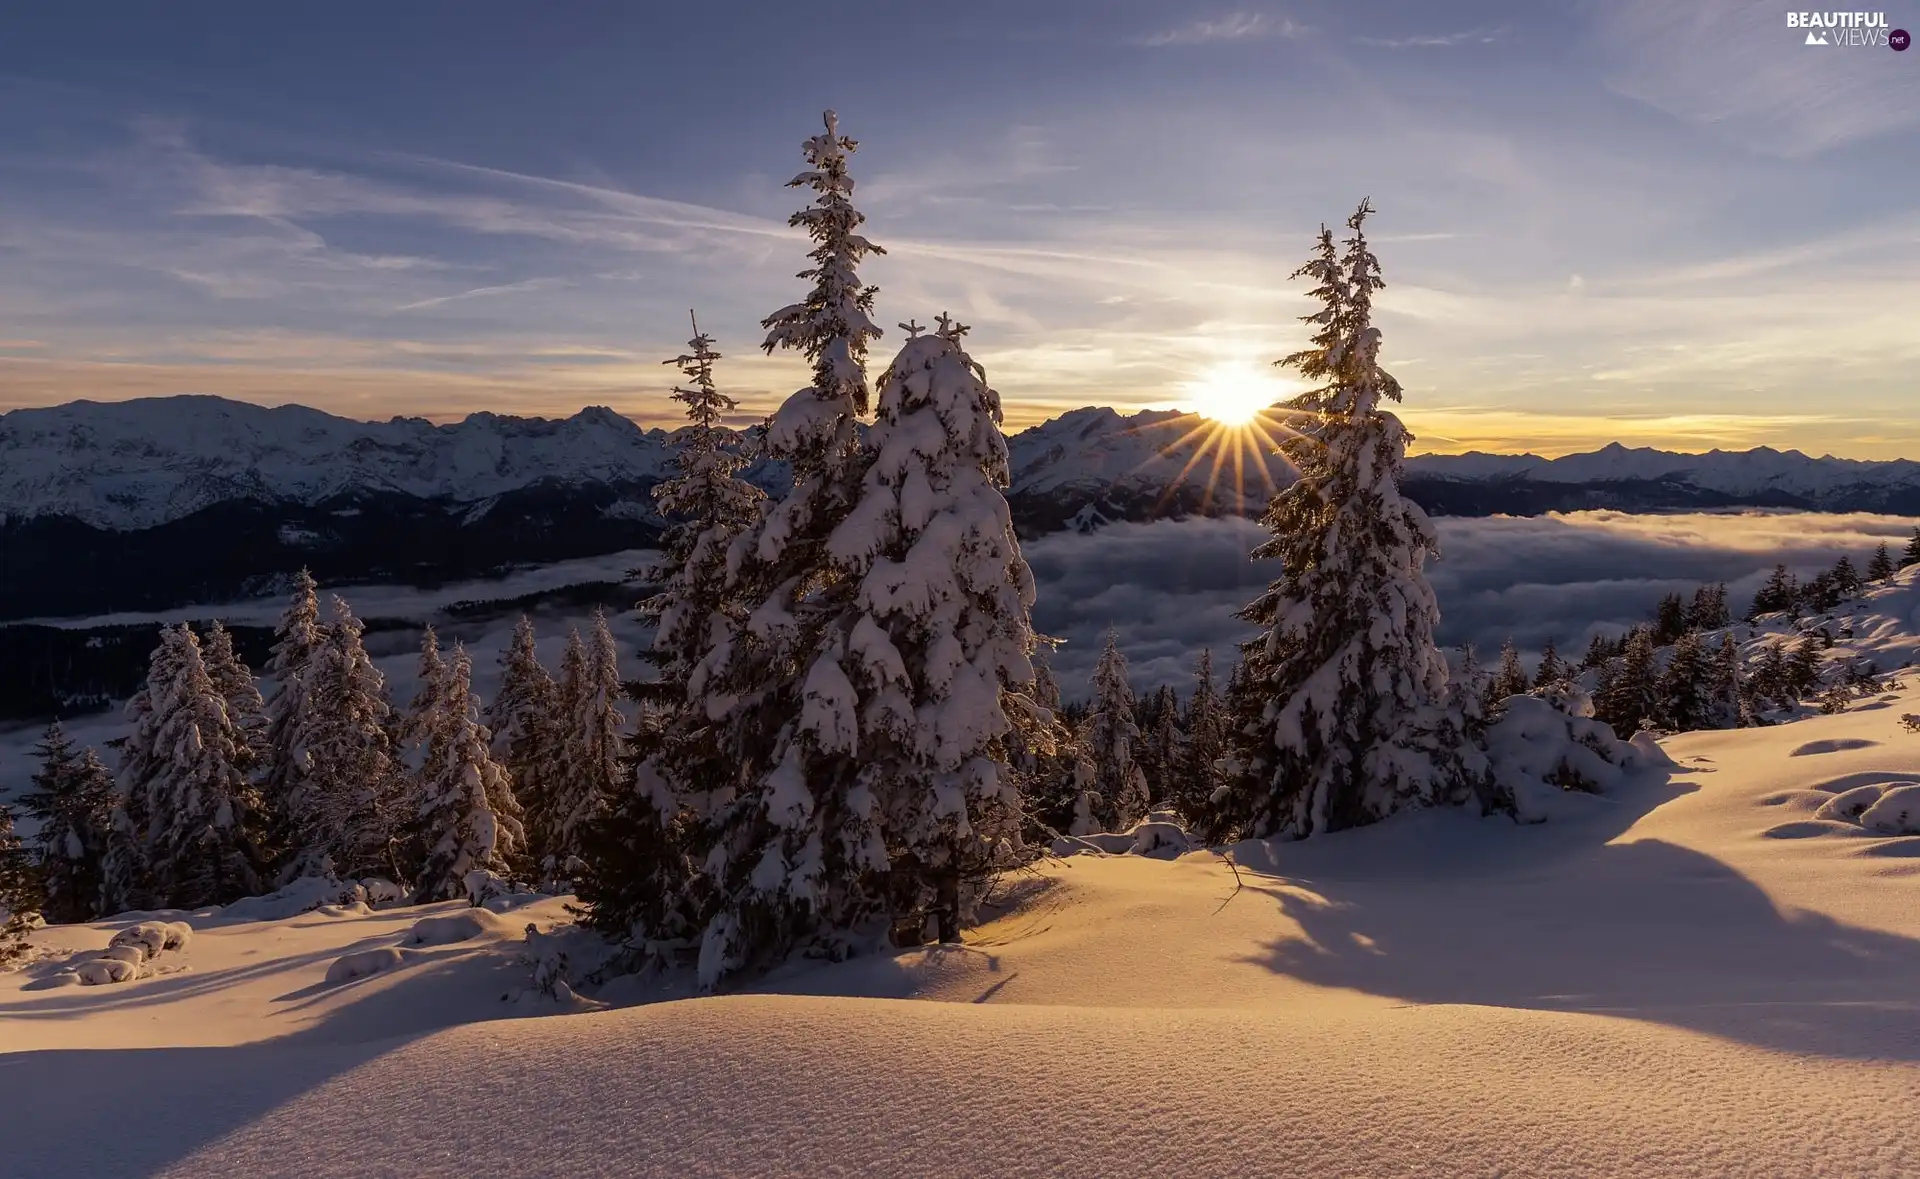 Wank Mount, Germany, winter, Great Sunsets, Fog, viewes, trees, Eastern Alps, Bavaria, Snowy, Mountains